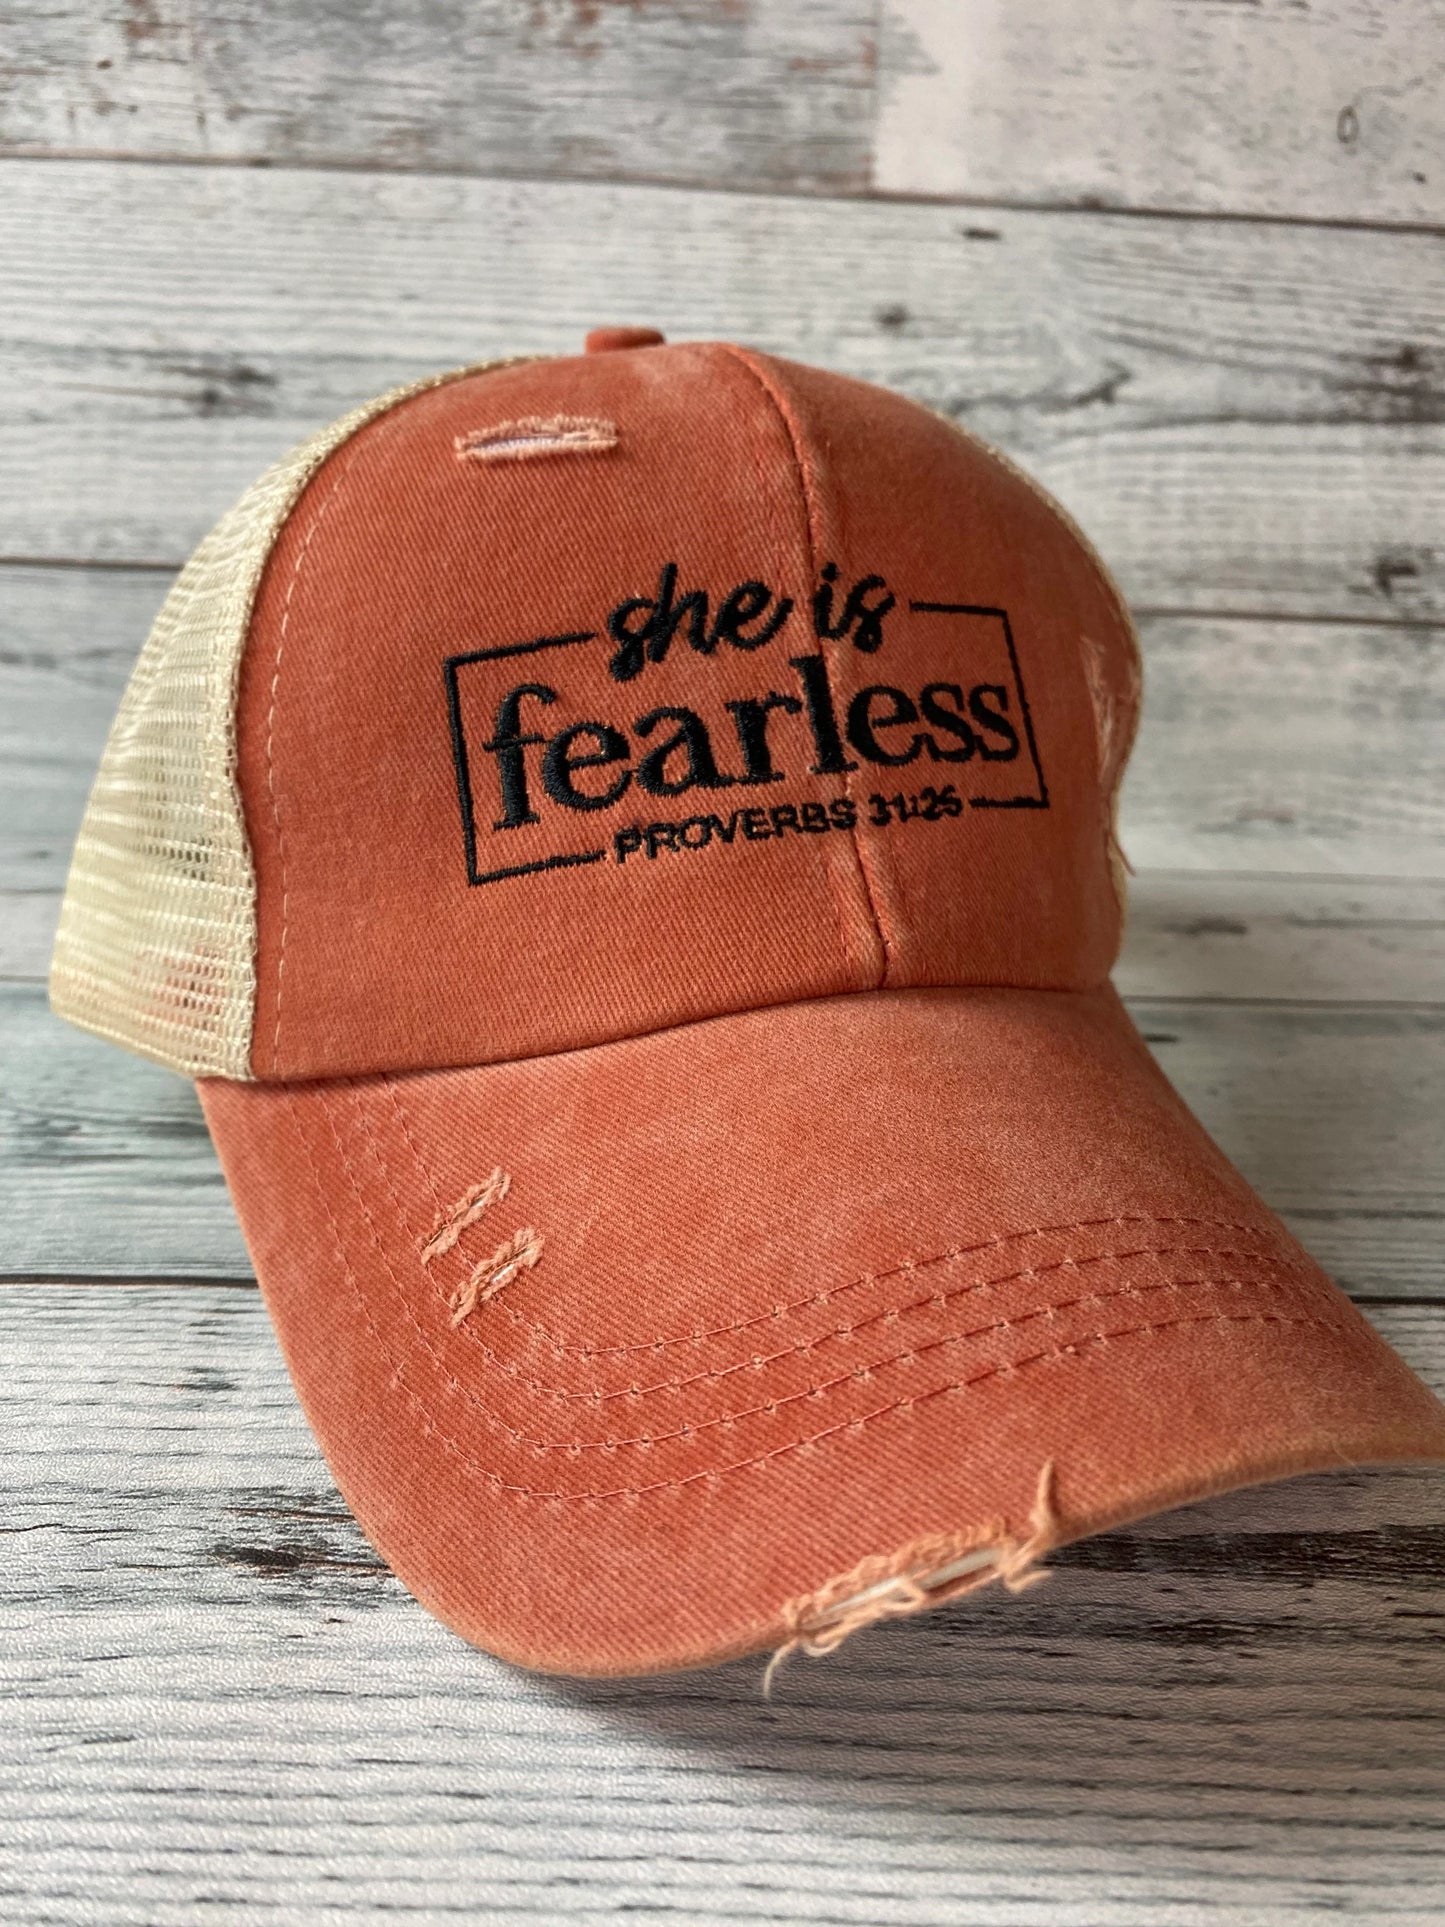 She is Fearless Proverbs 31:25 Embroidered Distressed Hat